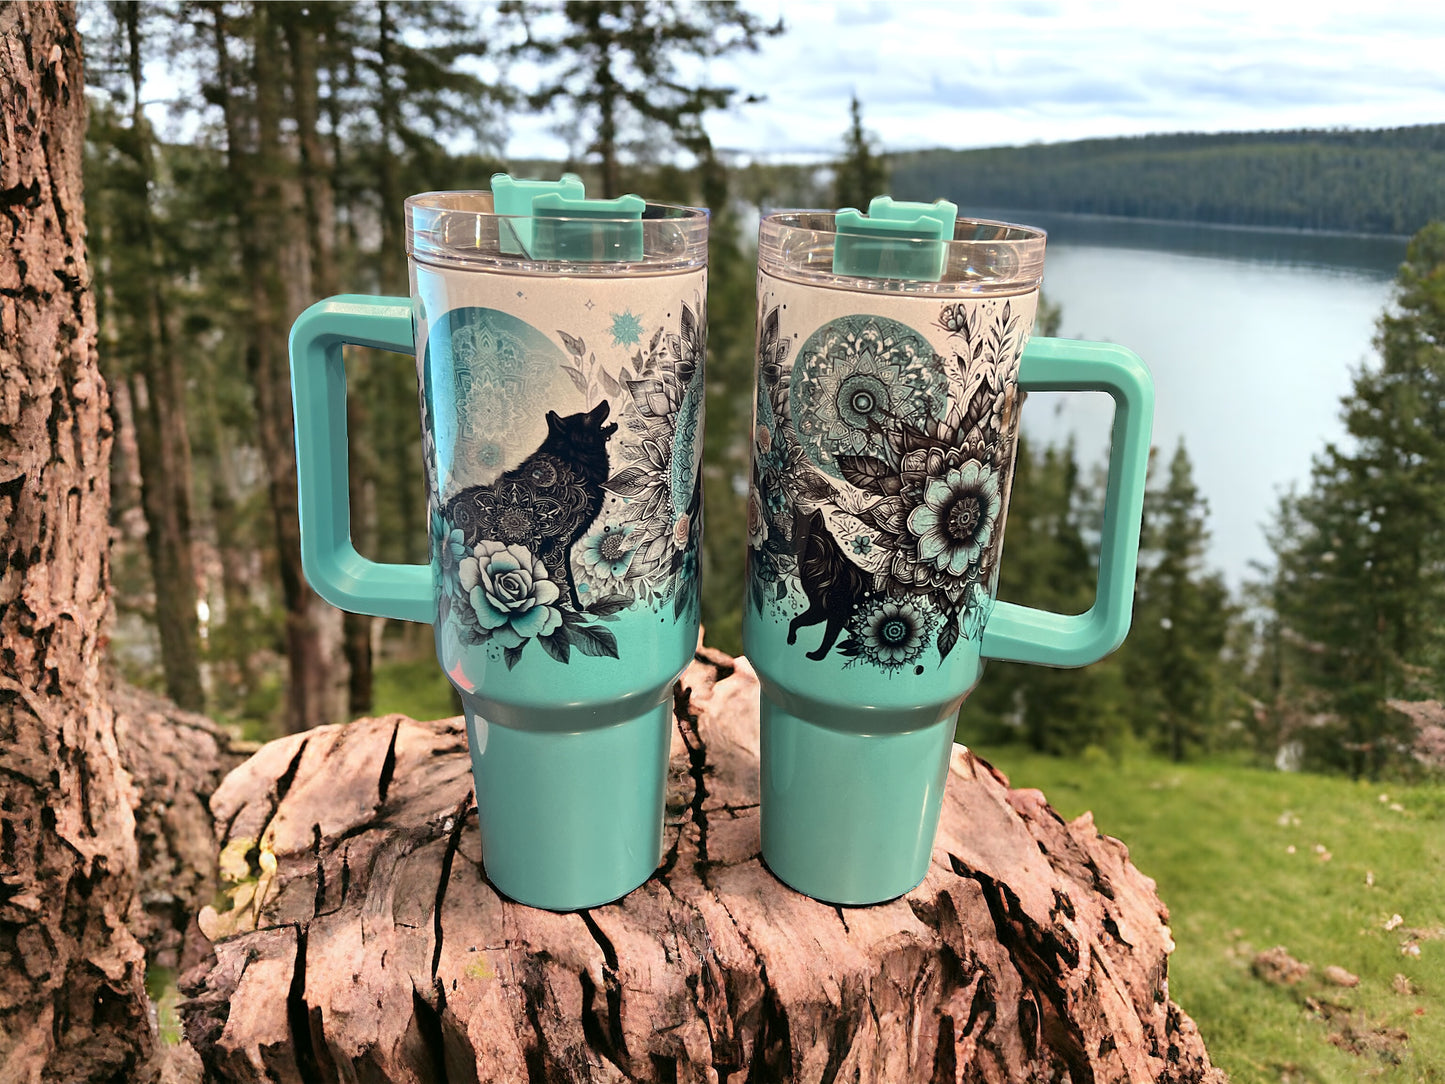 40oz Stanley Style Thirst Quencher Tumblers - Wolf’s flowers  Teal/white holographic, shimmer